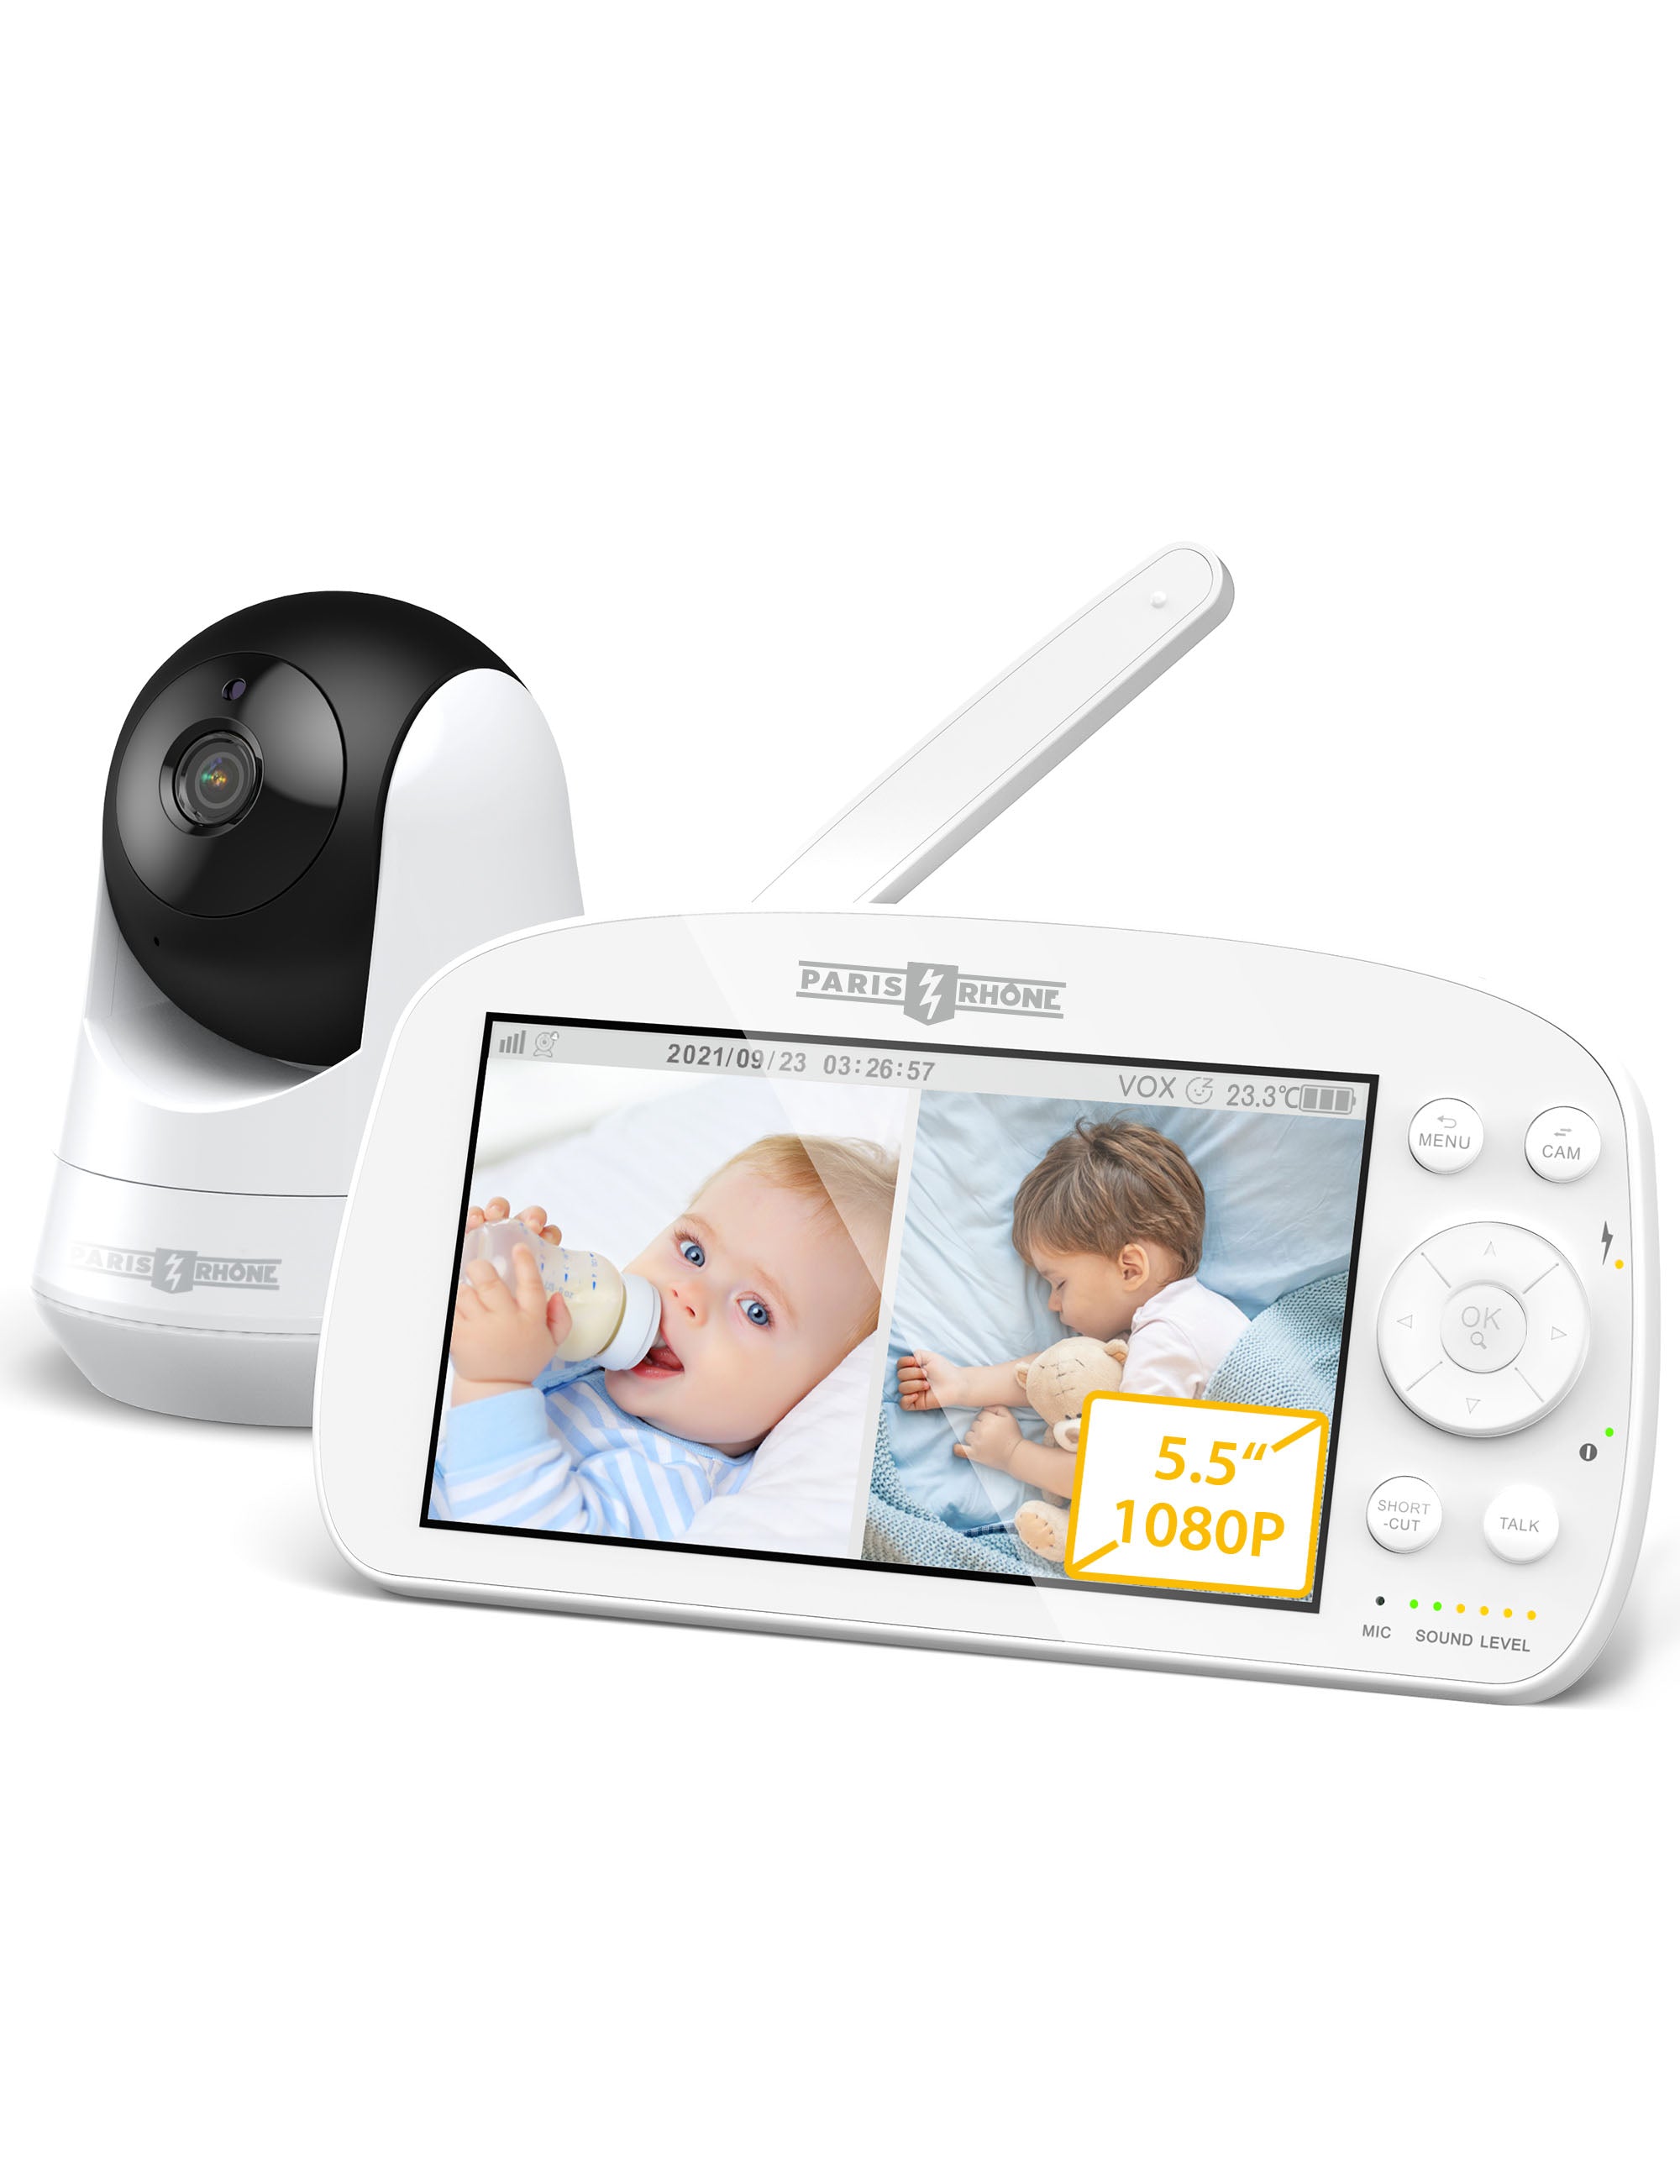 Support pour babyphone - Cdiscount